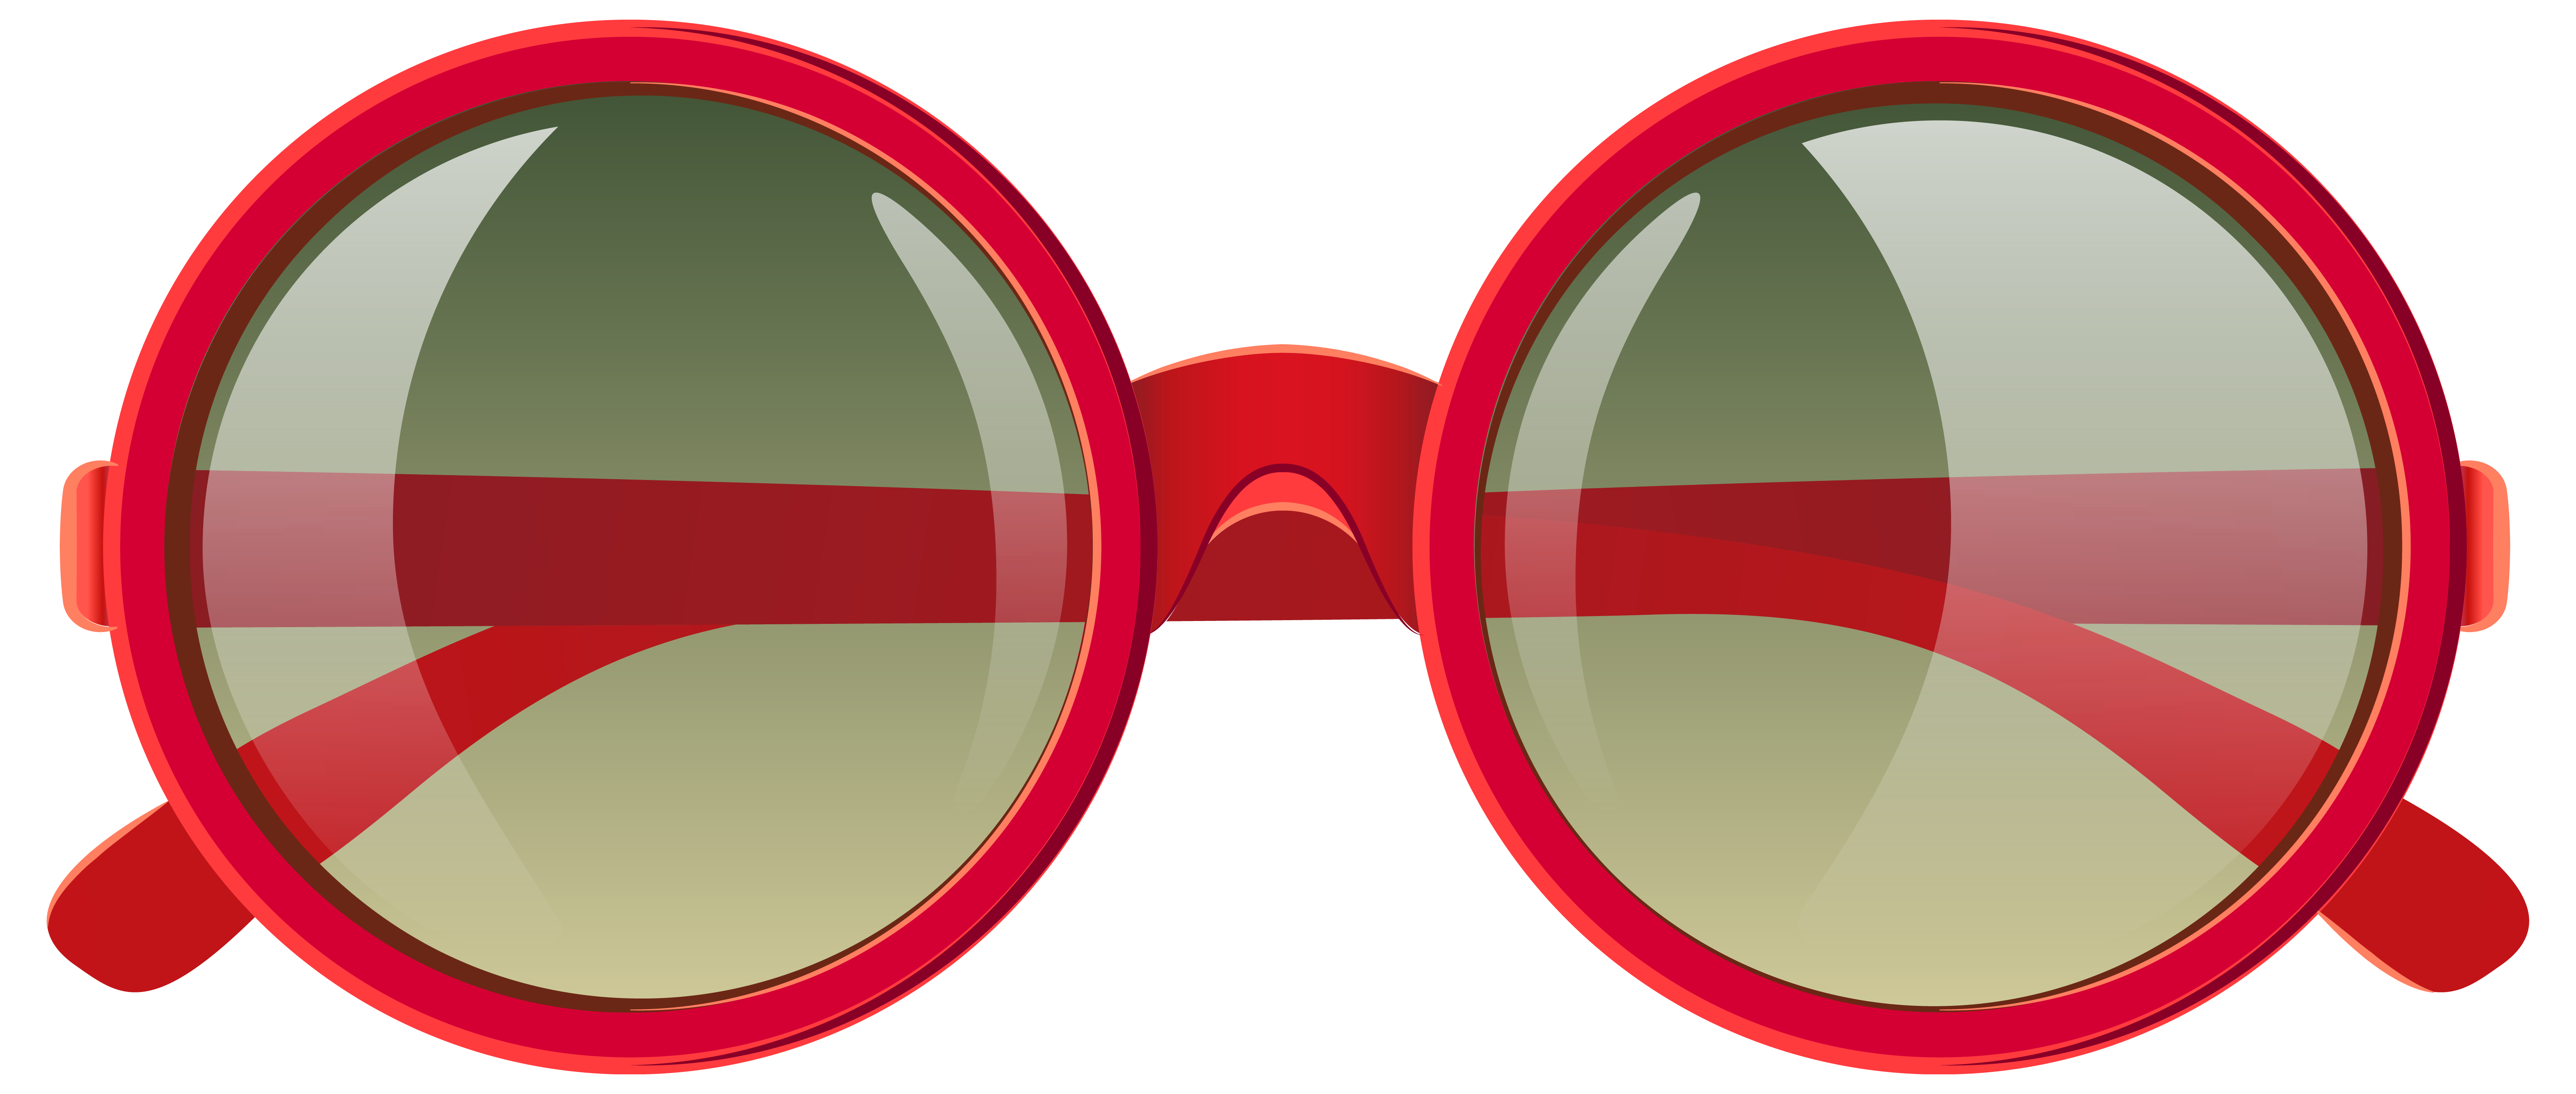 Goggles clipart stylish. Cute red sunglasses png